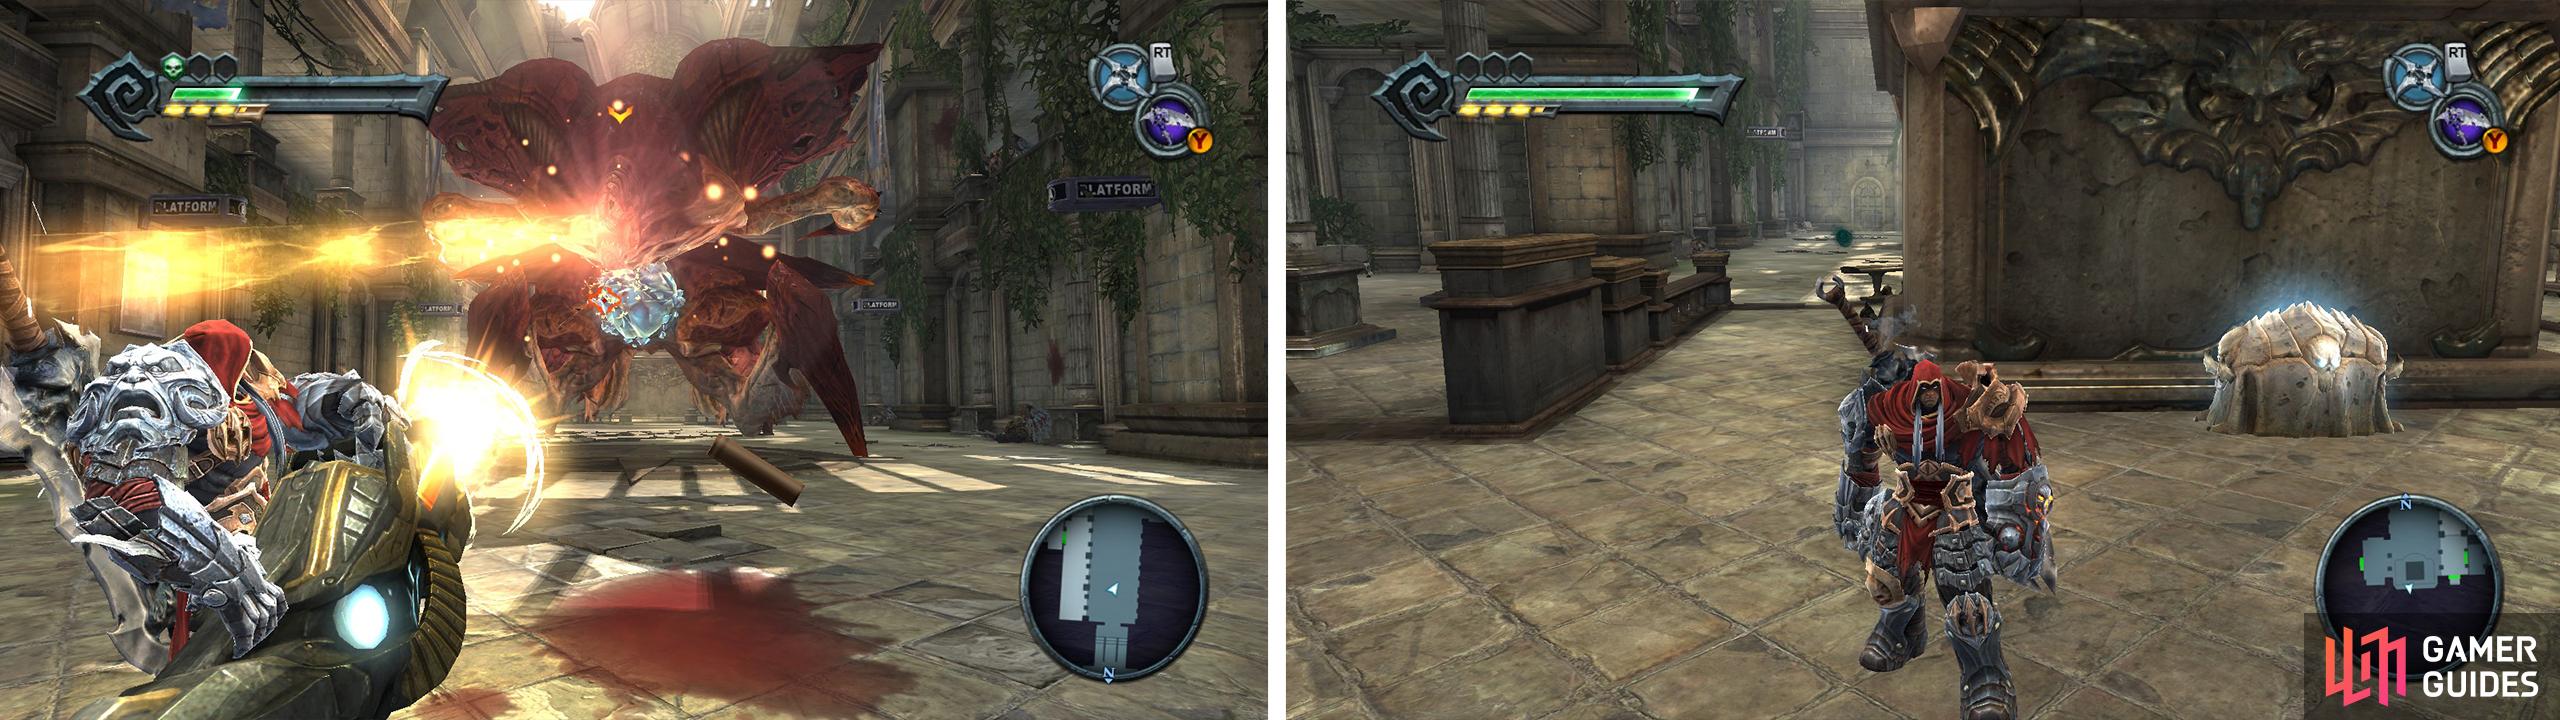 Shoot the boss in the chest until it flees (left). Look behind the clock to find a Blue Soul Chest (right).